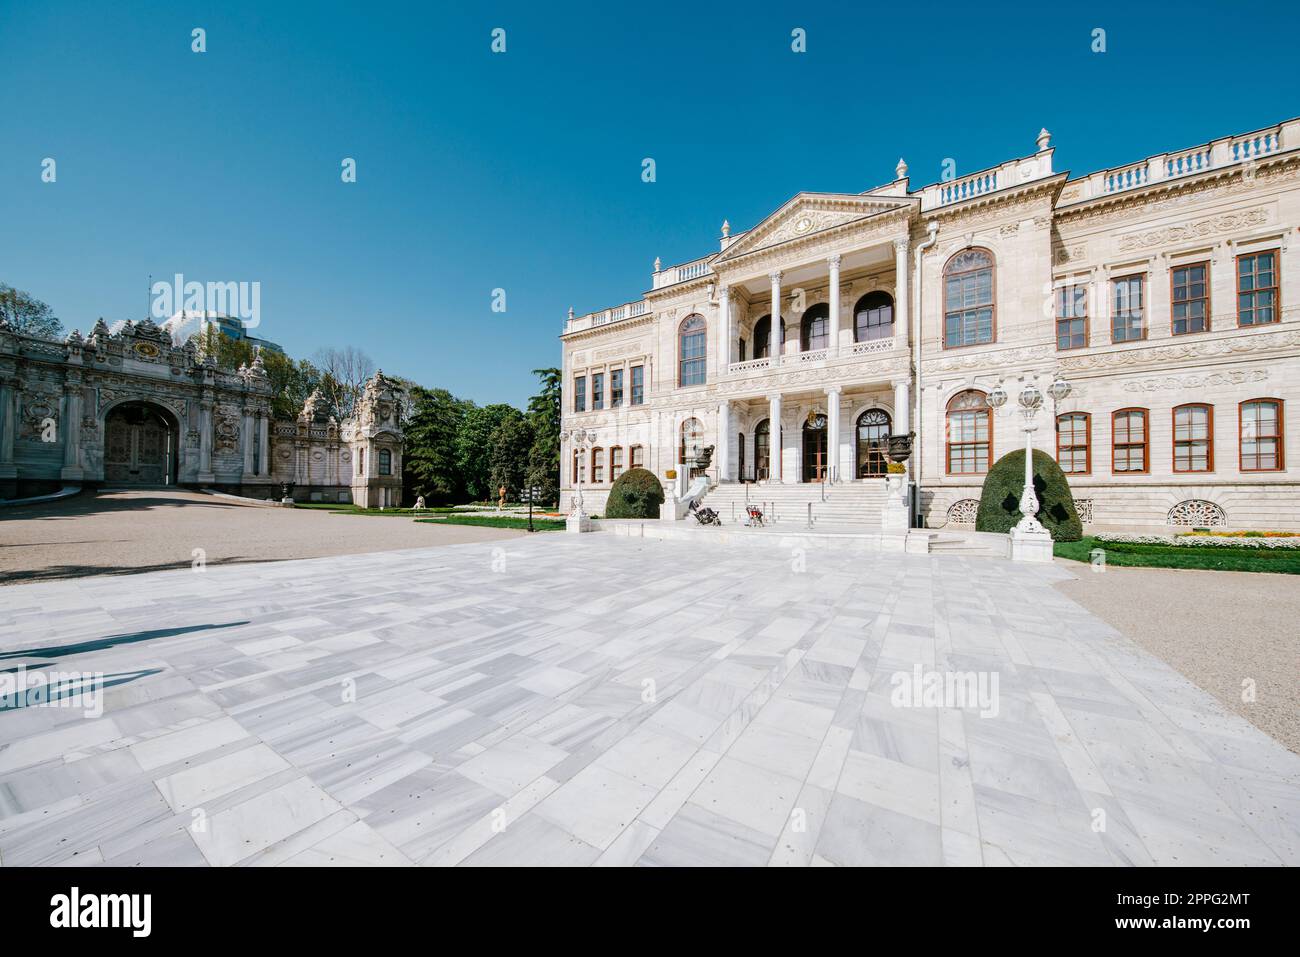 View of Dolme Bahce royal palace in Istanbul, Turkey Stock Photo